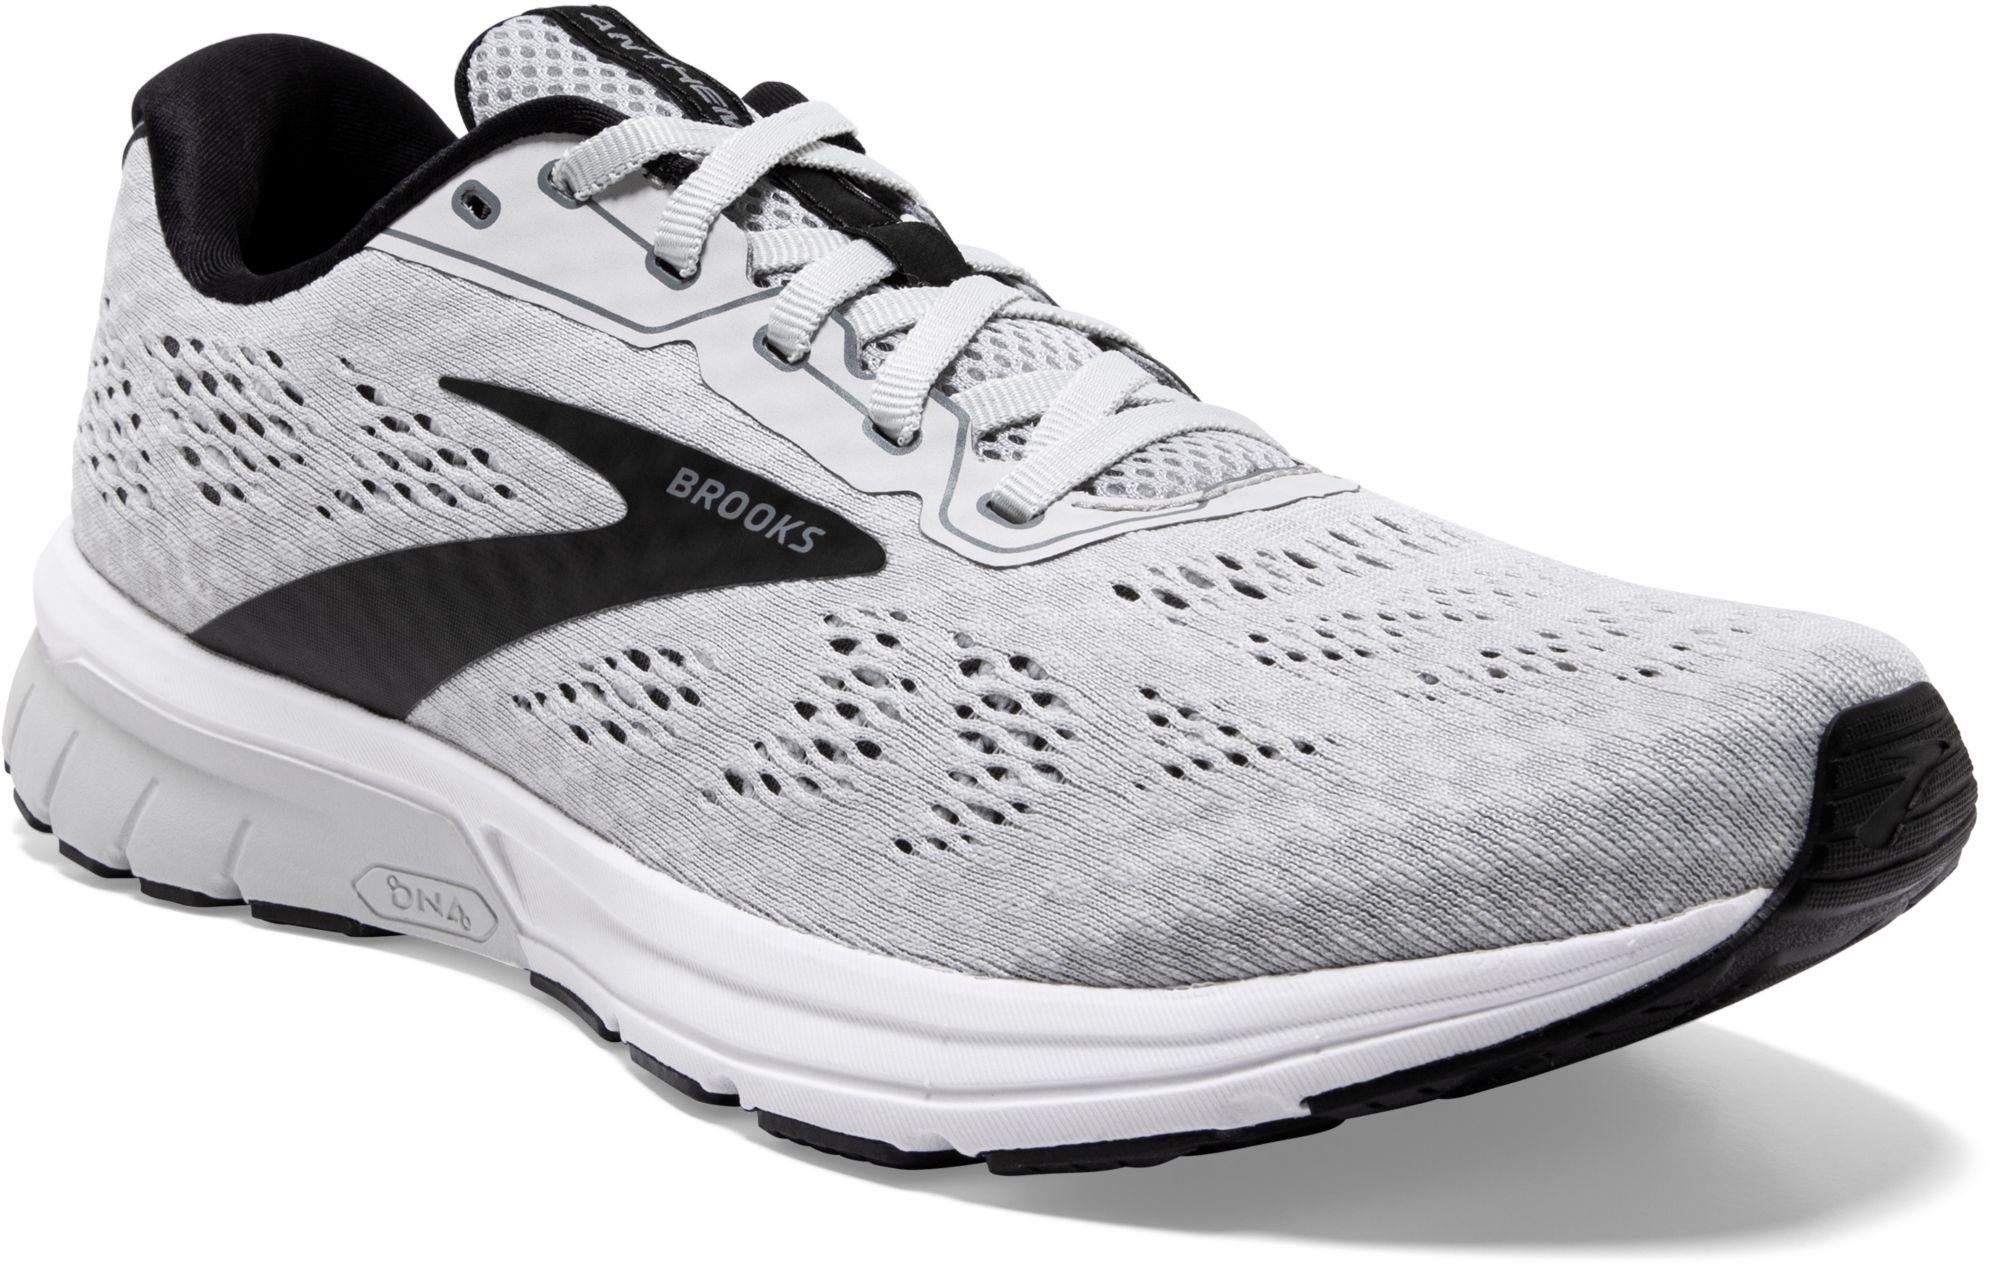 Brooks Anthem 4 Running Shoes in Grey/Black (Gray) for Men - Lyst